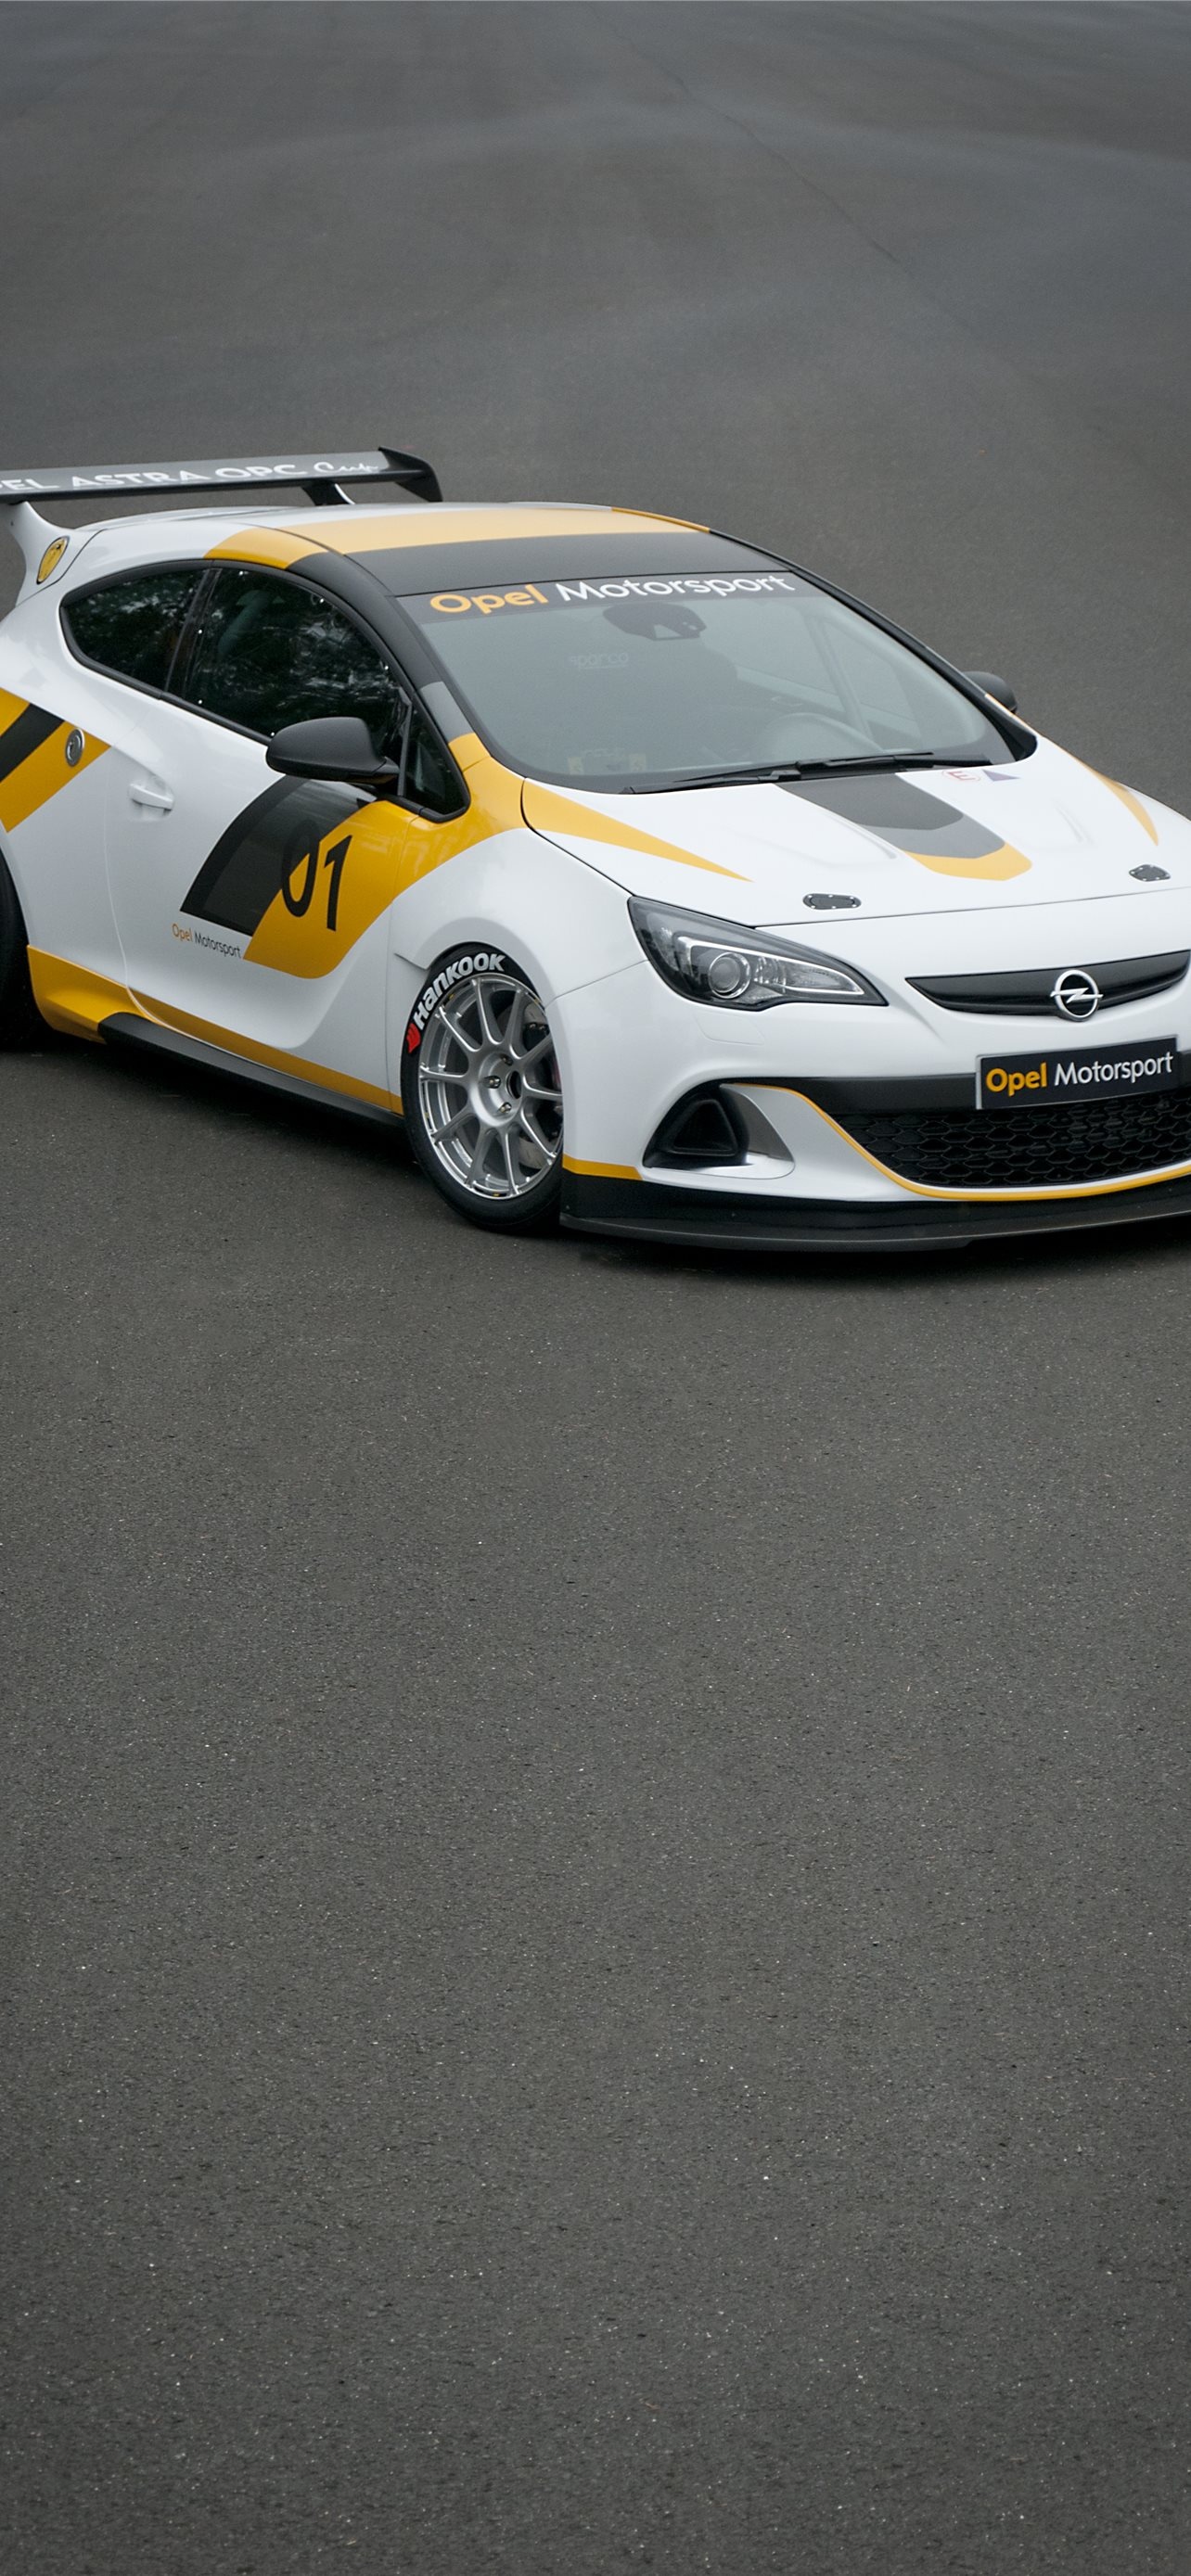 Opel Astra, Latest iPhone wallpapers, Free HD backgrounds, Stunning visuals, 1290x2780 HD Handy